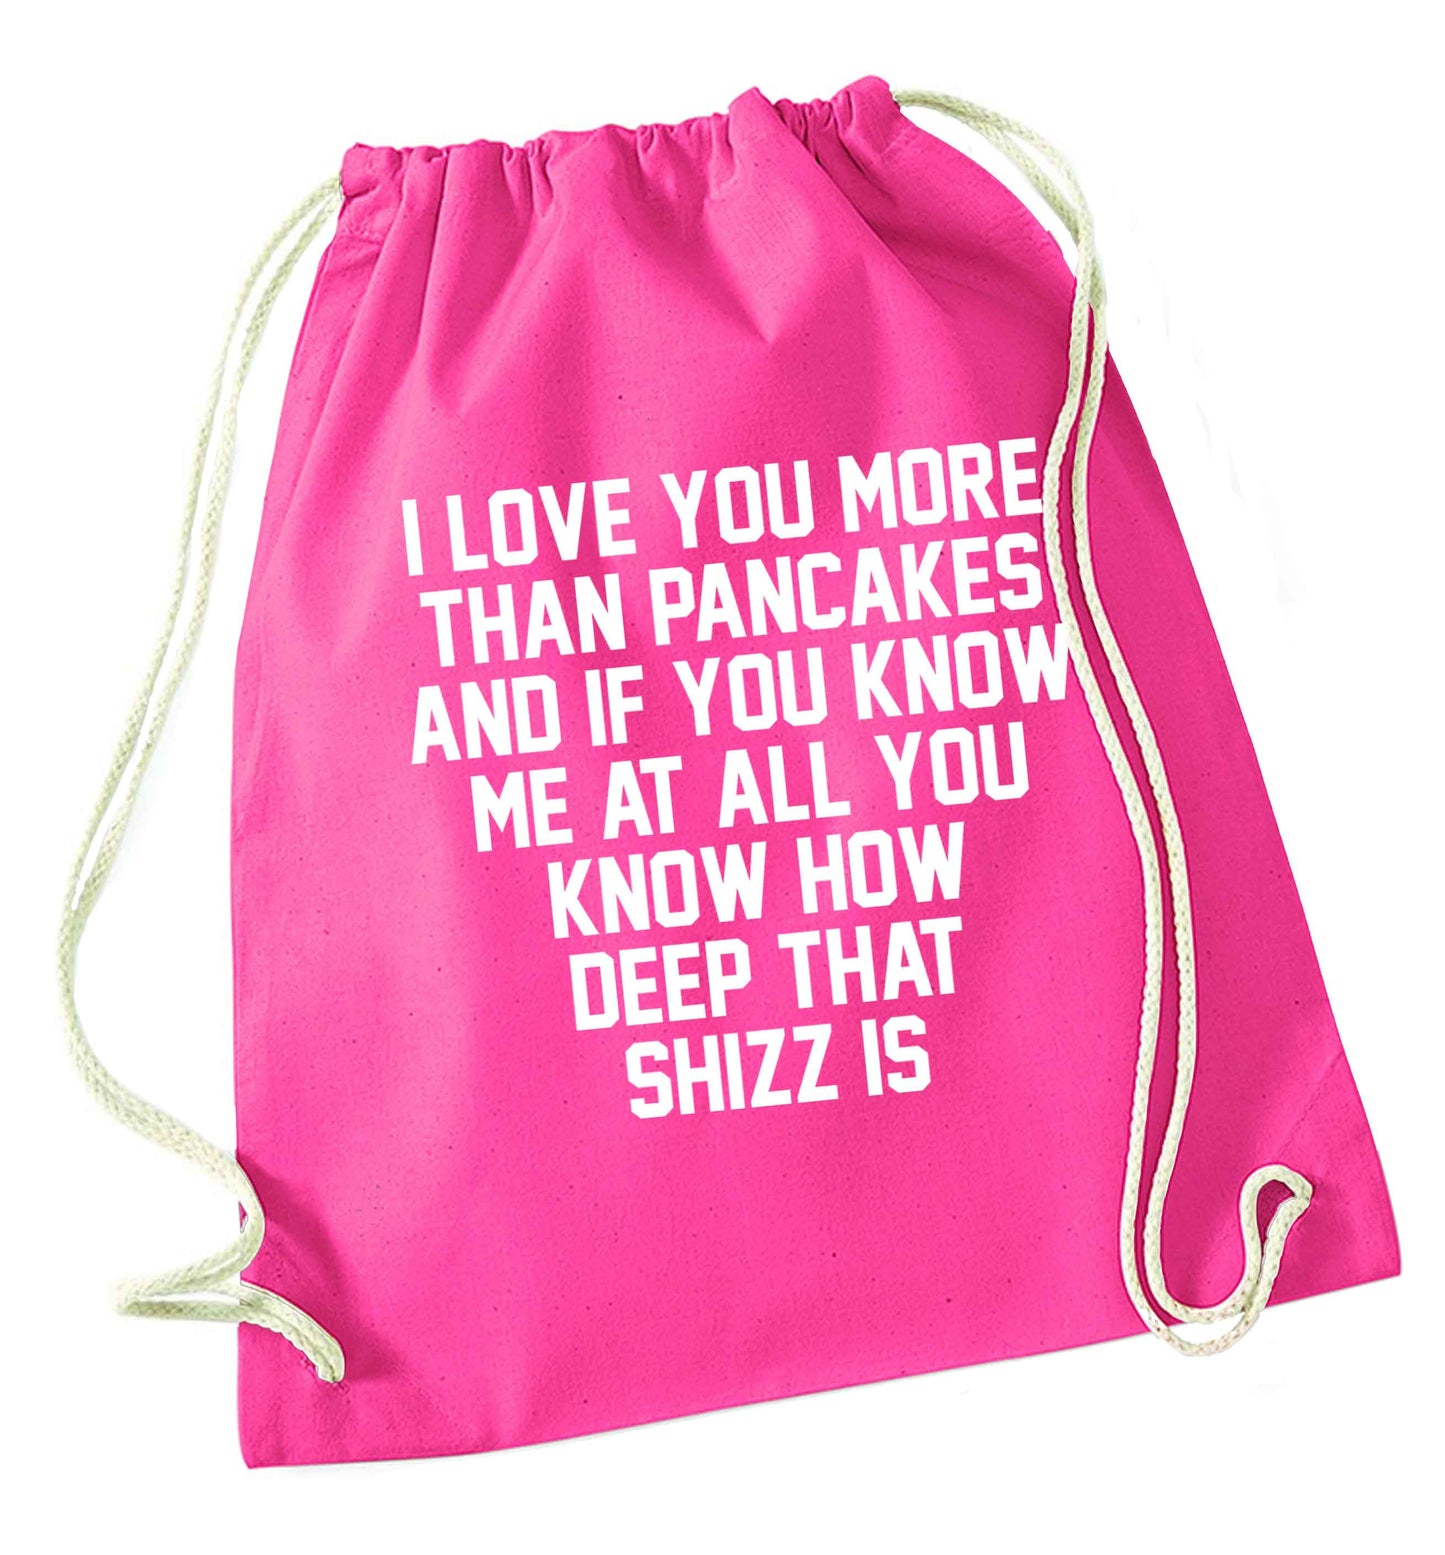 I love you more than pancakes and if you know me at all you know how deep that shizz is pink drawstring bag